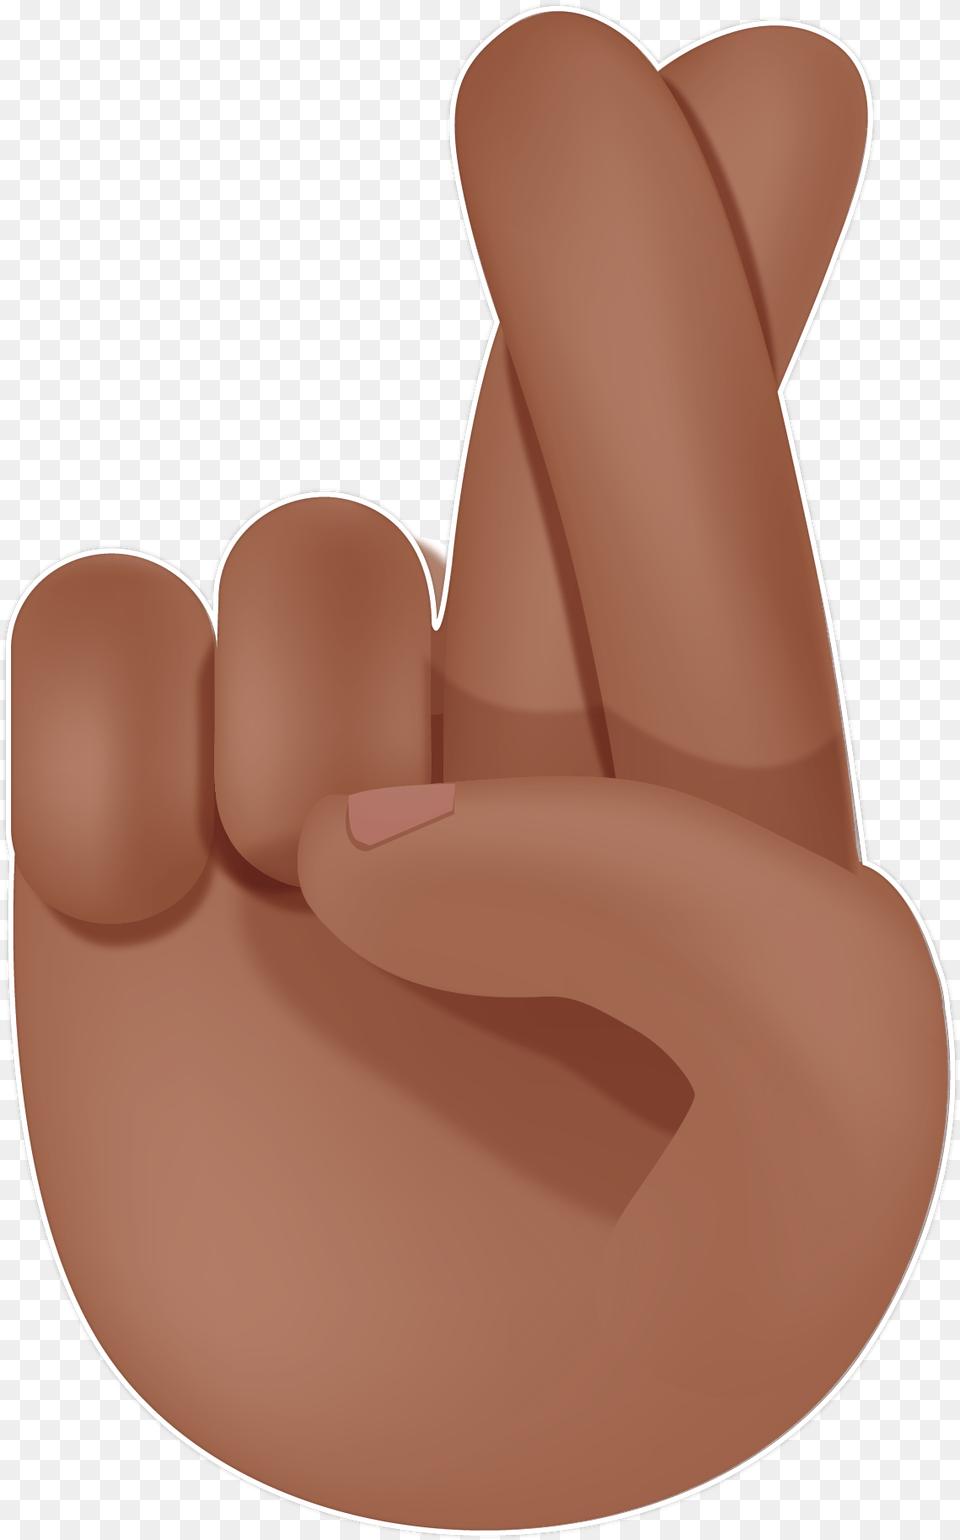 Stuck On Emojis Stickers Fingers Crossed Emoji Black, Body Part, Finger, Hand, Person Png